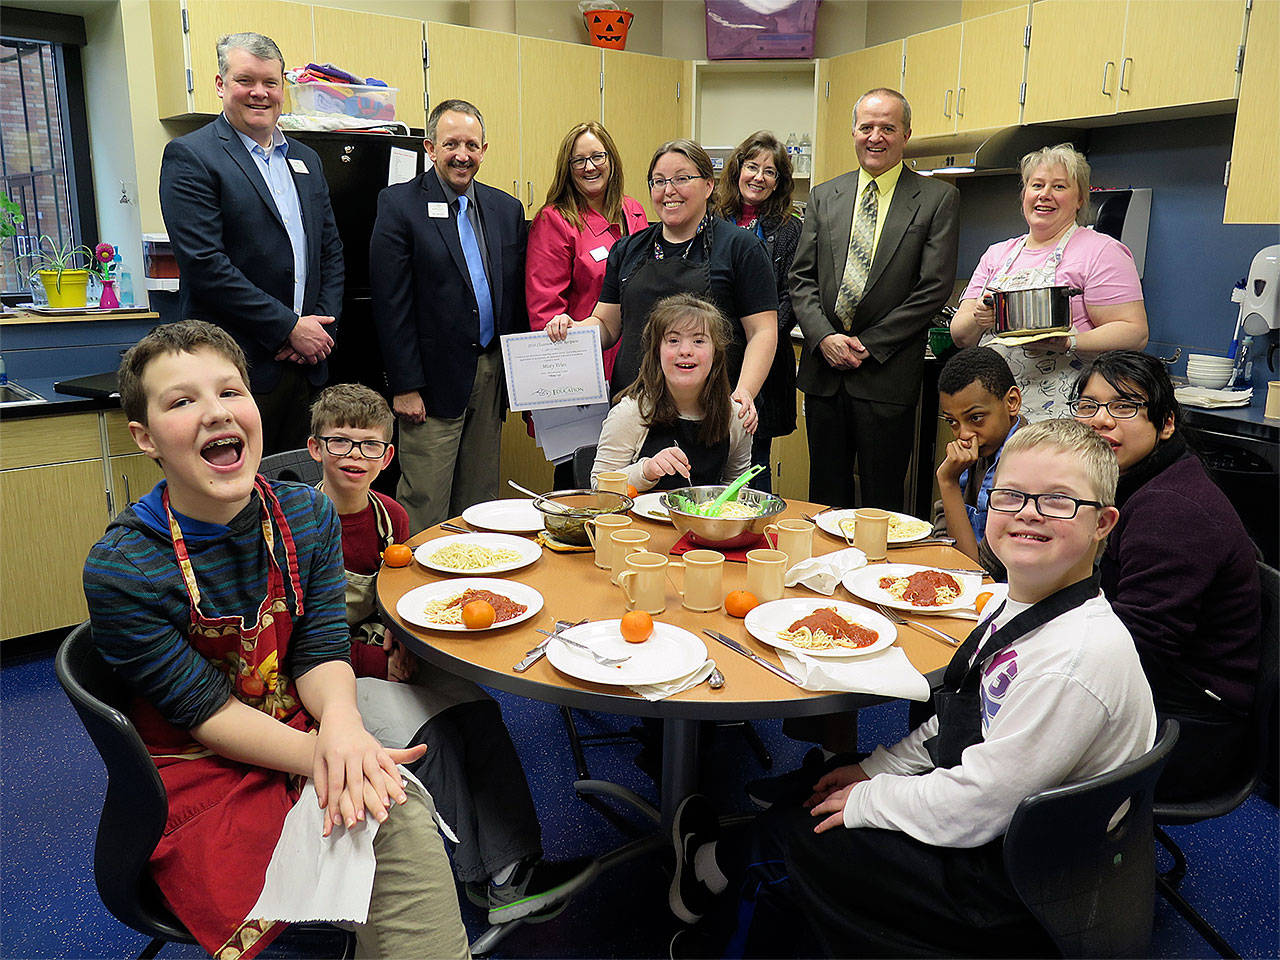 The Snohomish Education Foundation presents a grant to Valley View Middle School’s Viking Café, a life skills program that teaches the students how to read instructions and prepare and cook meals. (Contributed photo)